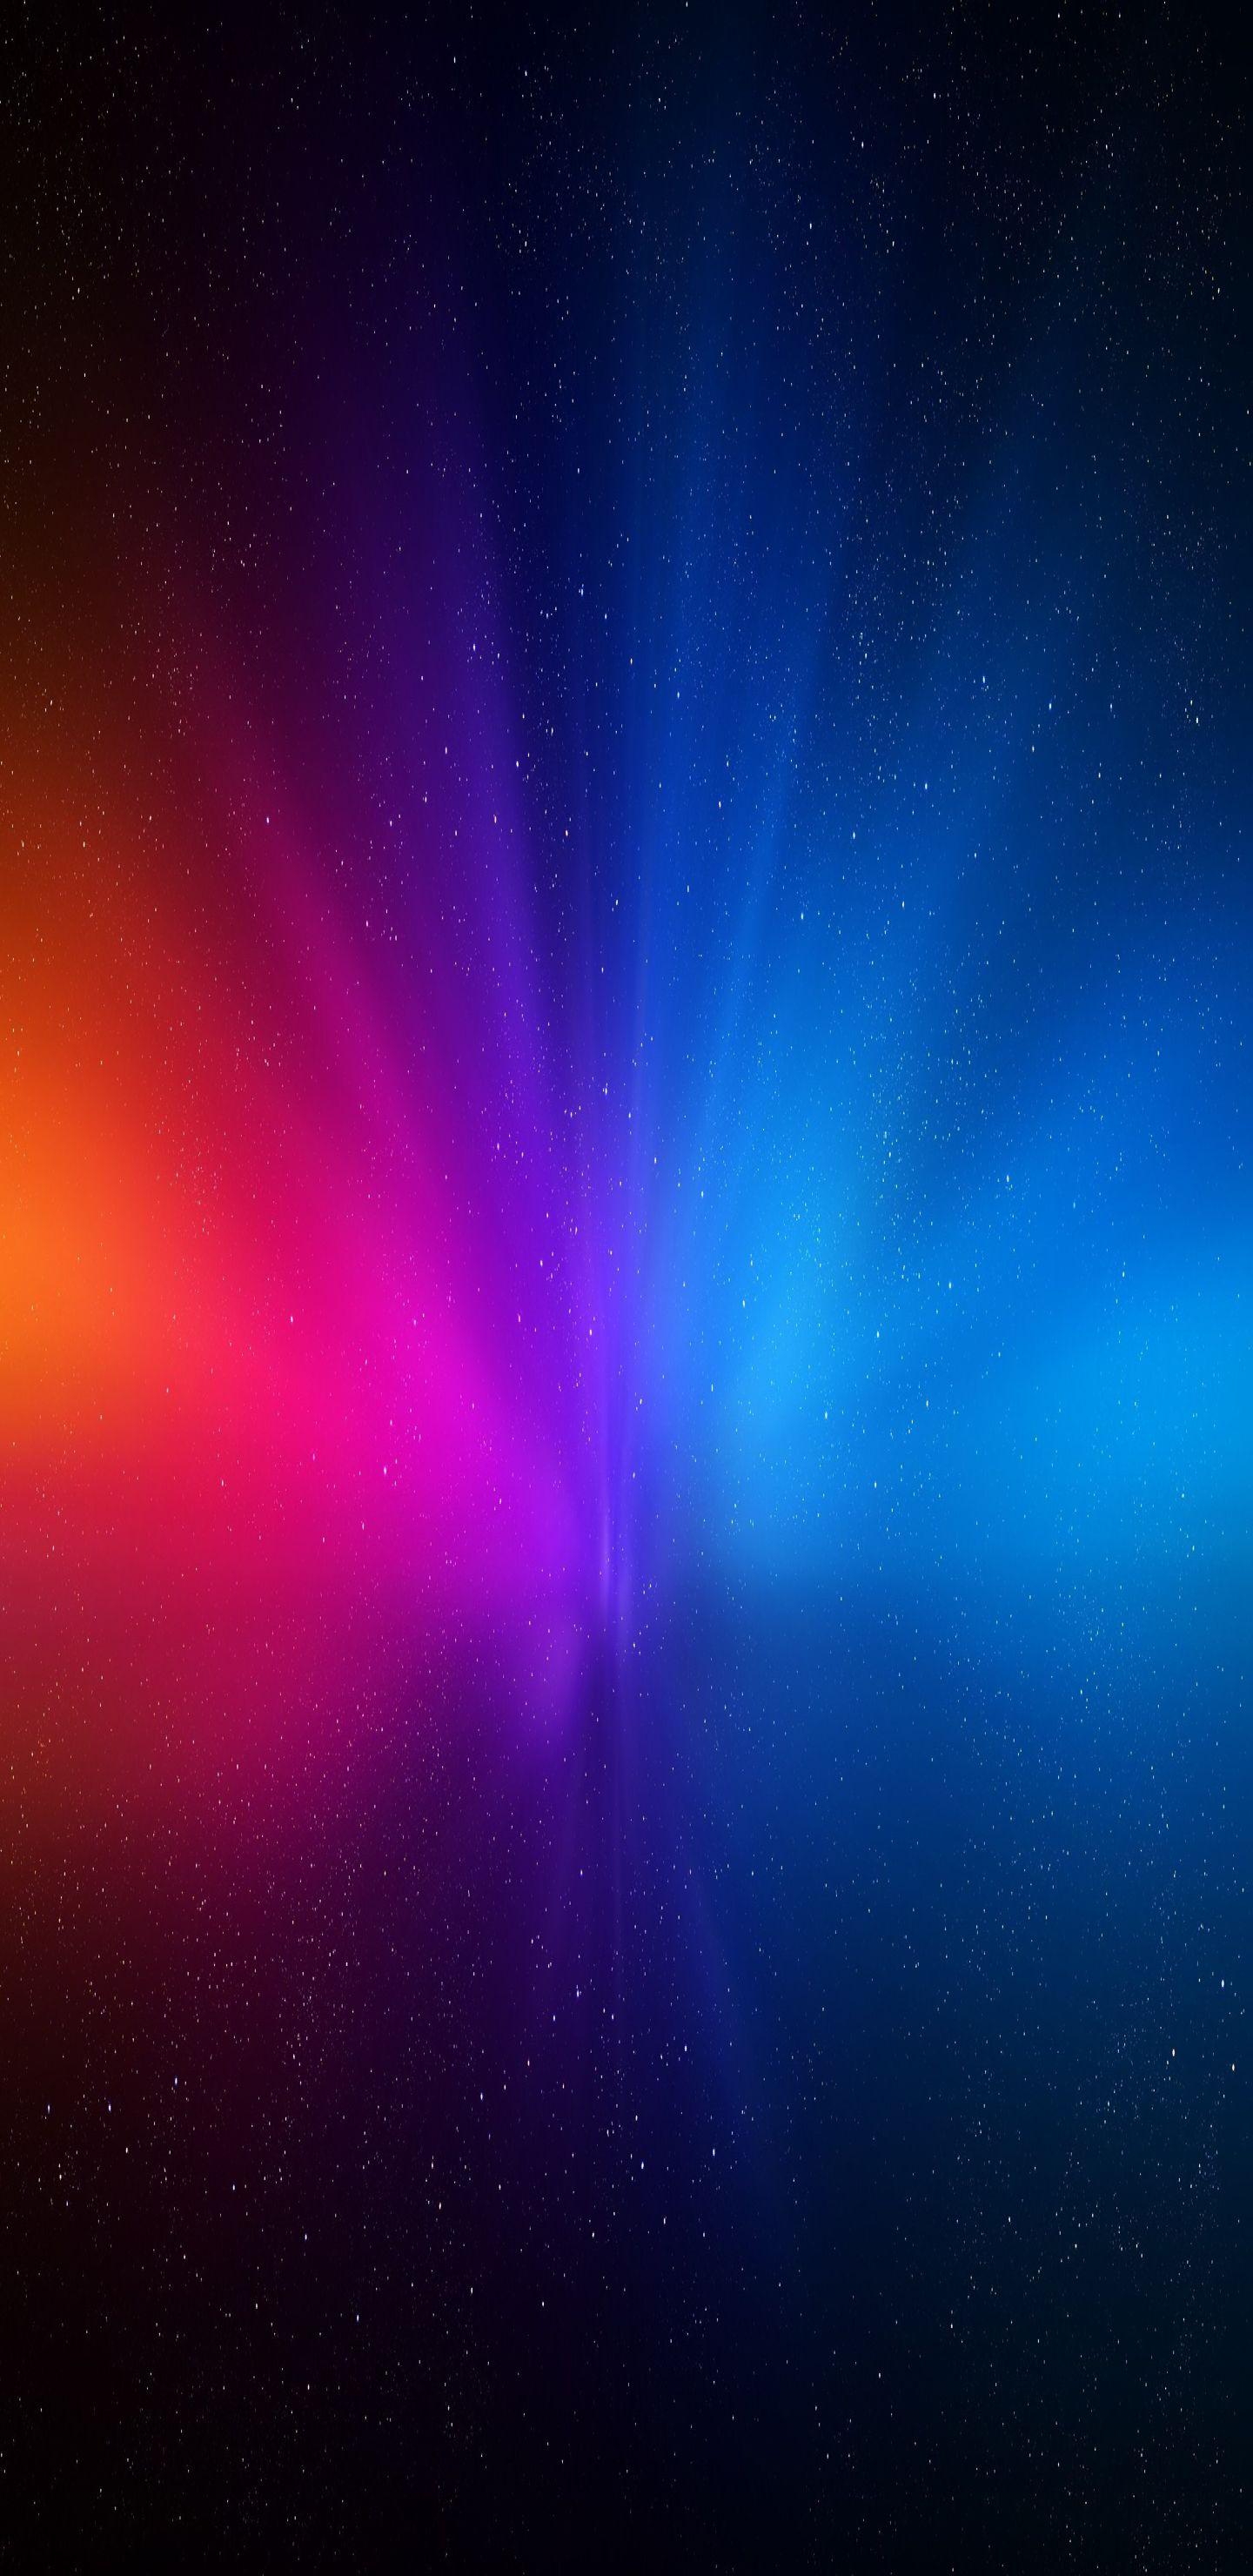 Blue, red, purple, space, minimal, abstract, wallpaper, galaxy